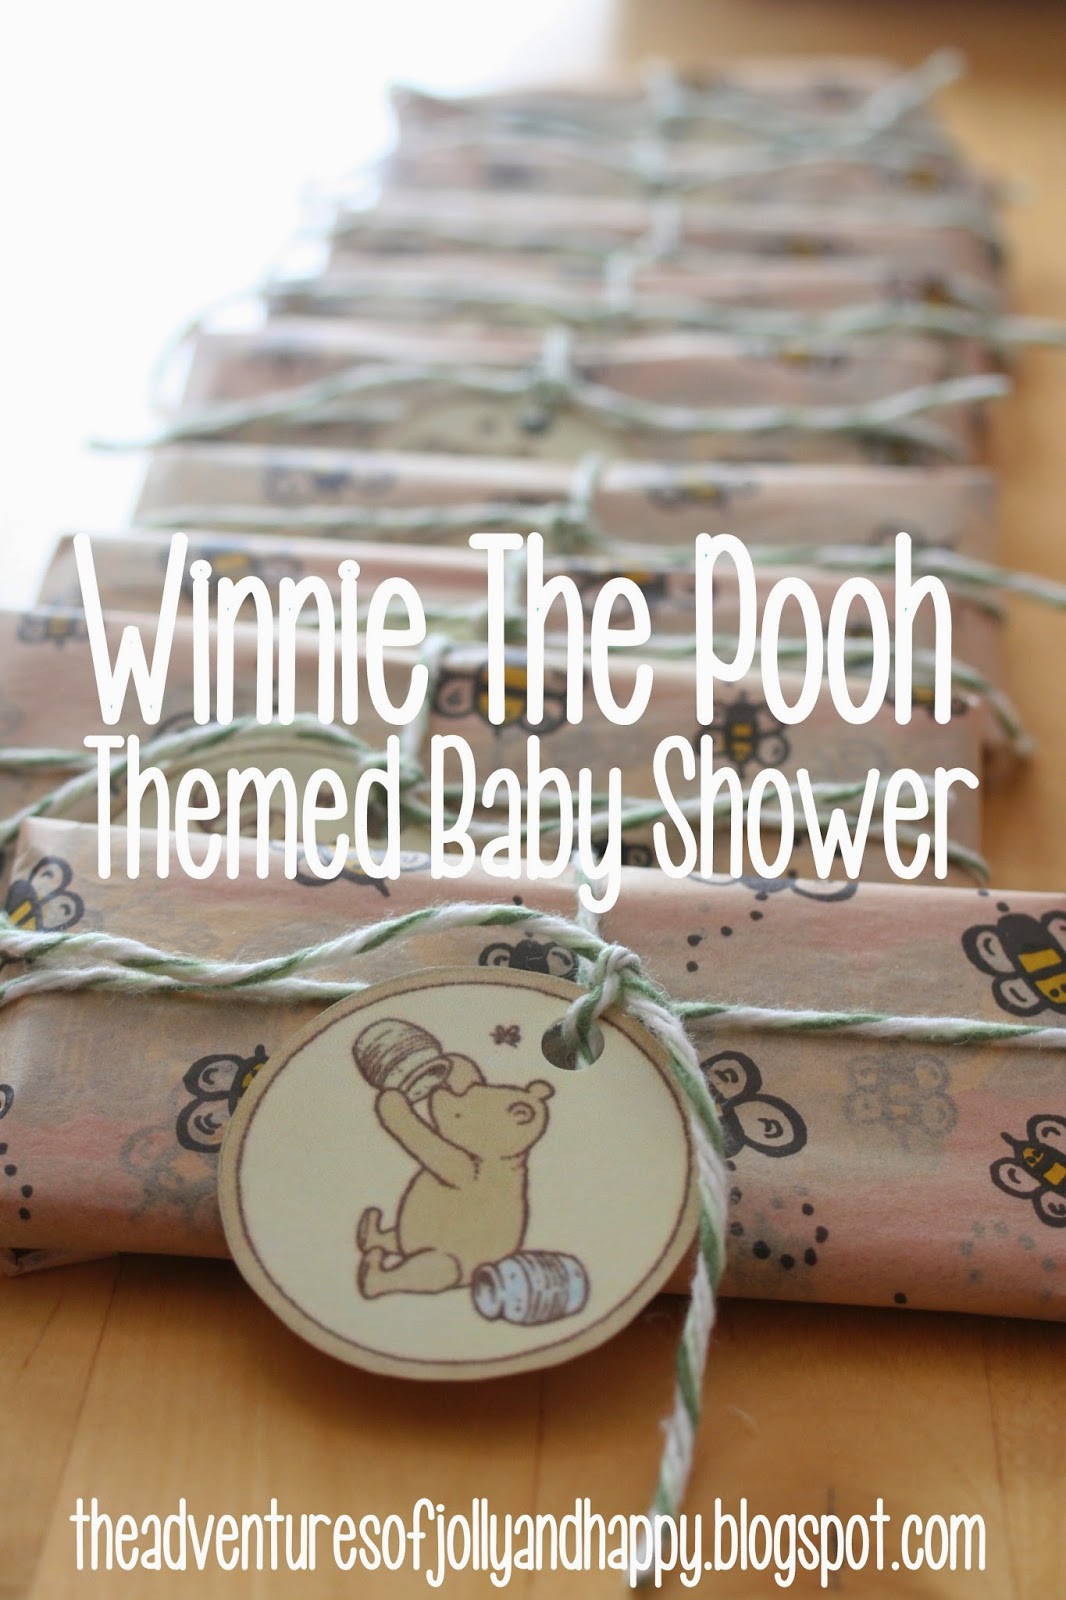 Winnie the Pooh HUNNY Pot Favor – About Family Crafts